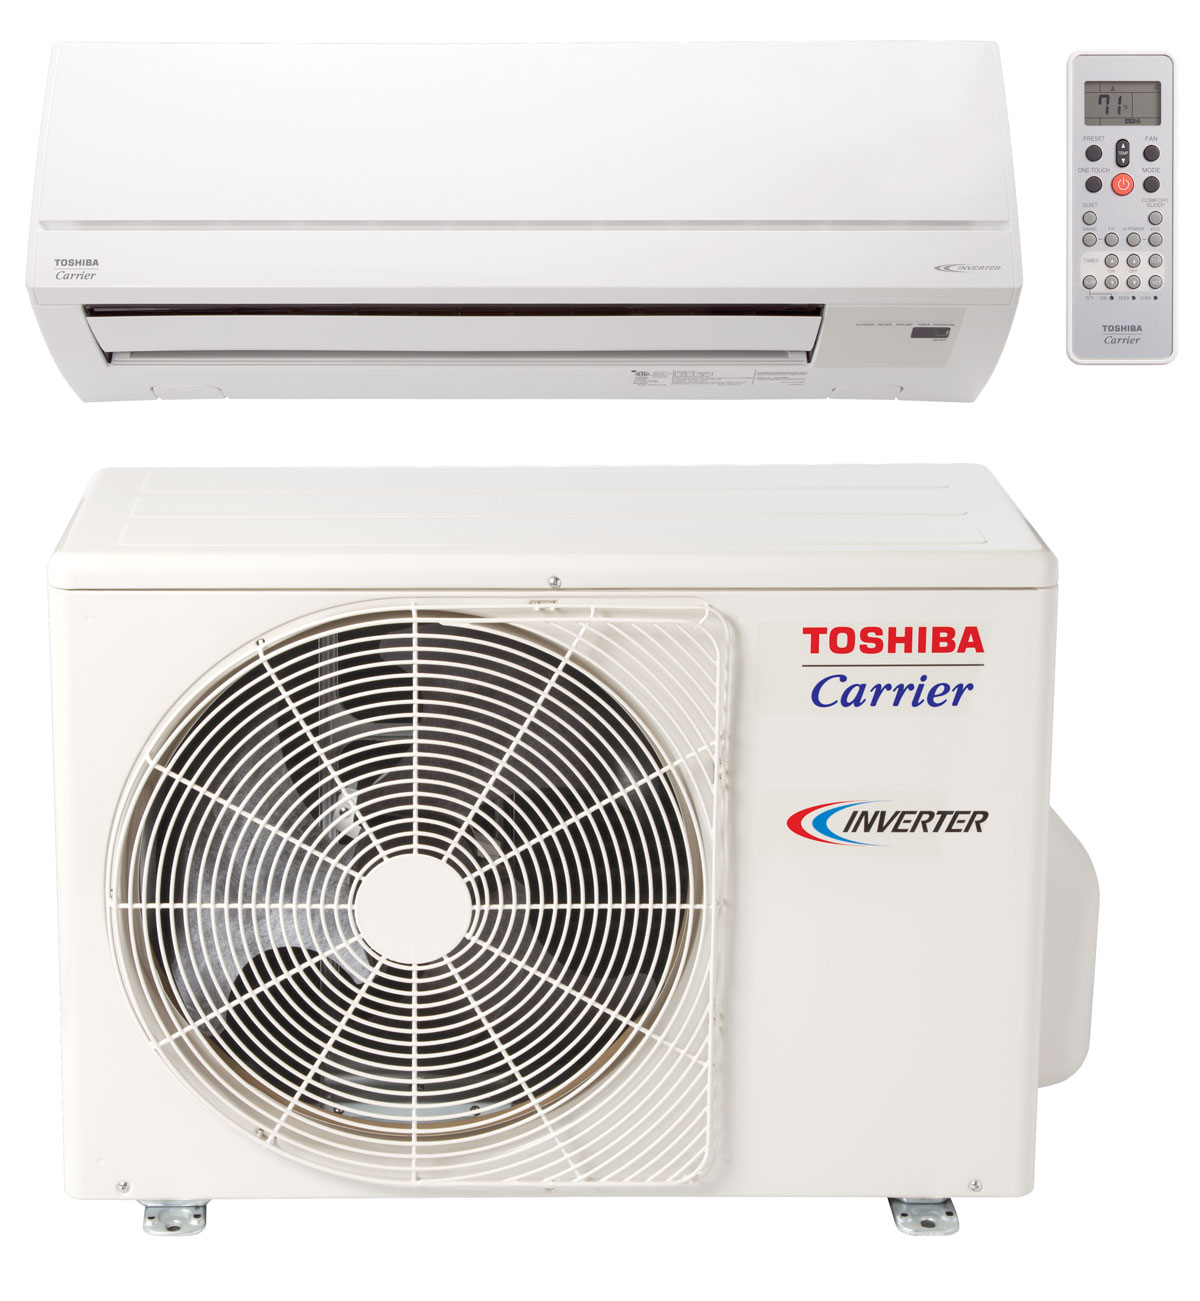 Uploaded Image: /vs-uploads/ductless/Carrier-single_ductless_RAS_high_wall_system-1200w.jpg